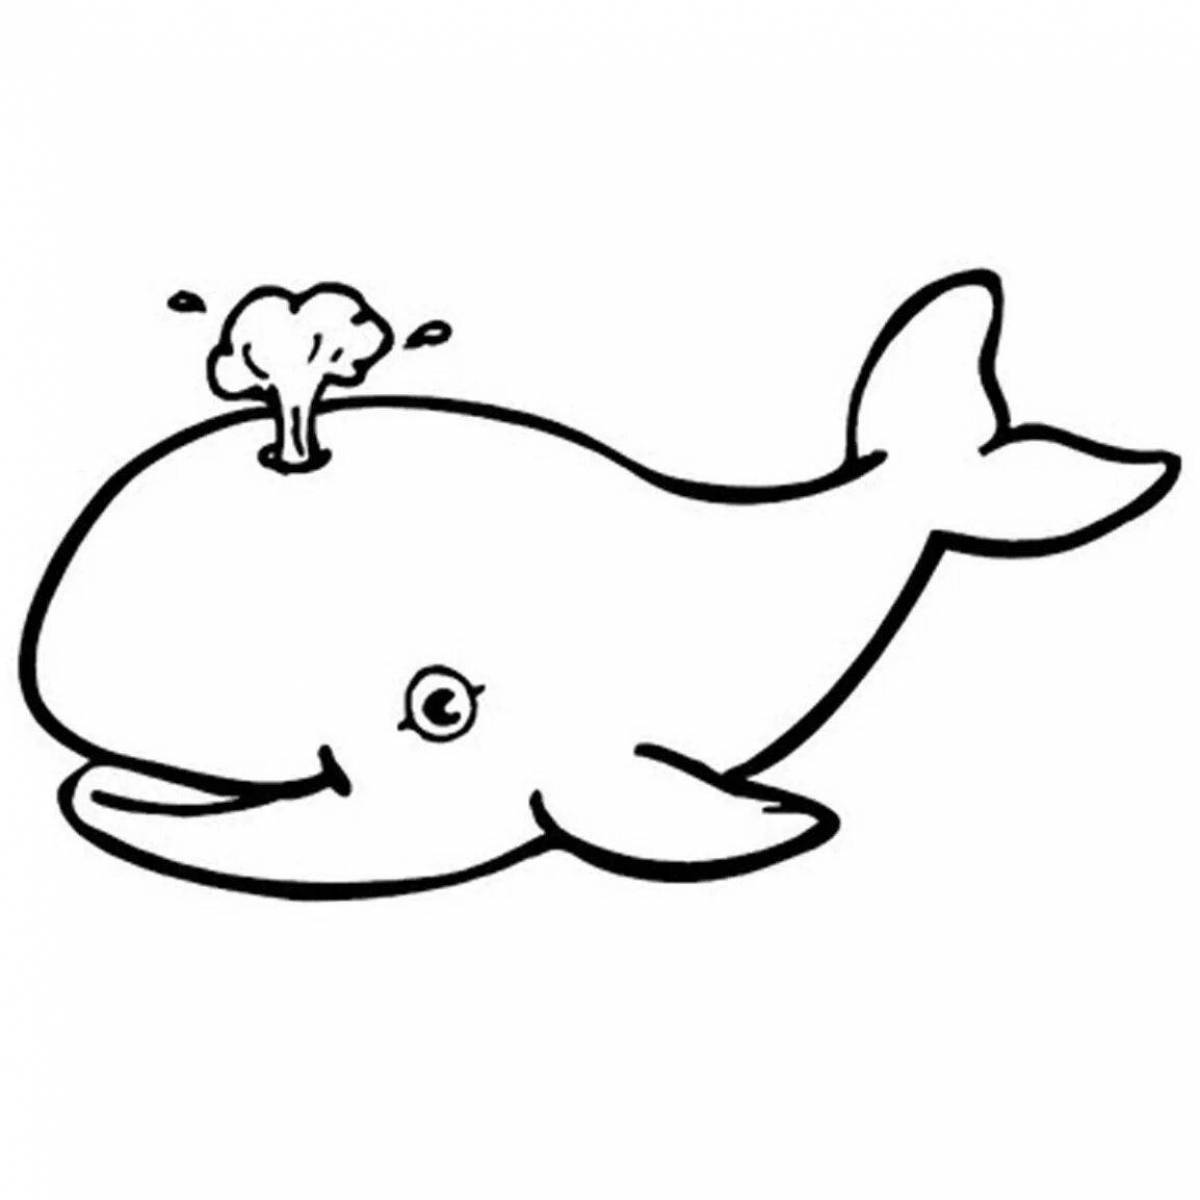 Great whale fish coloring book